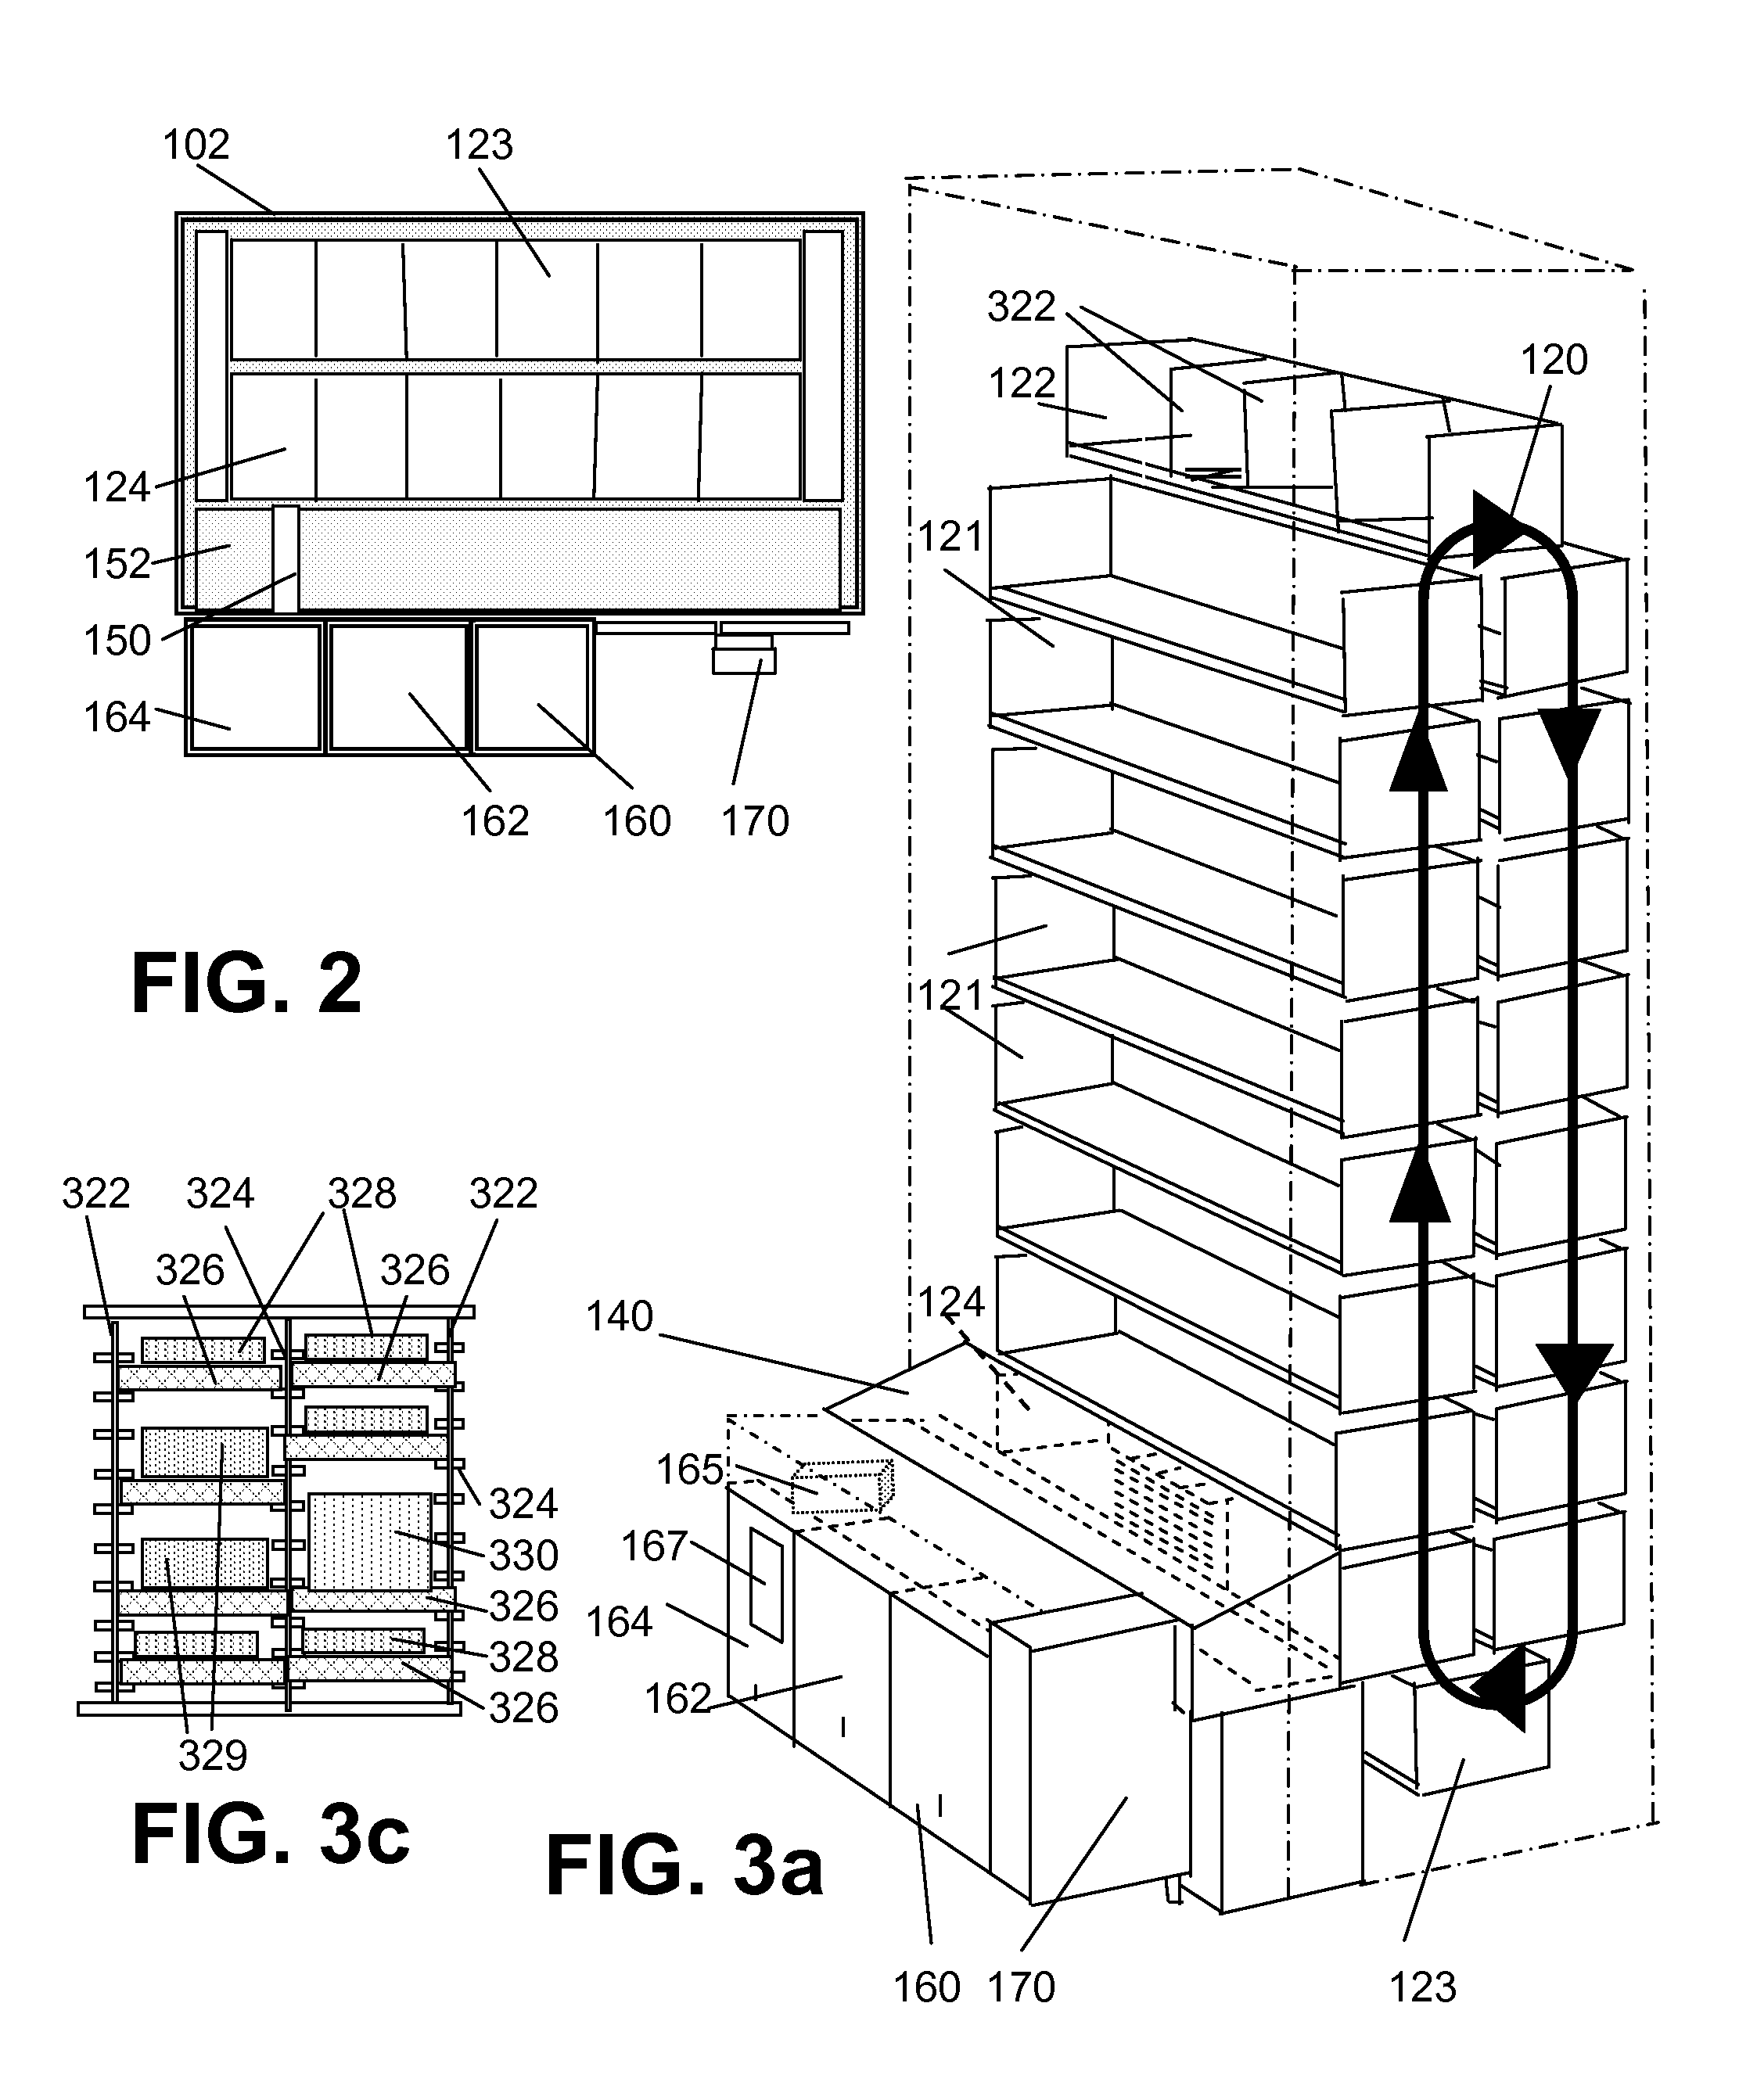 Automated system for storing, retrieving and managing sample